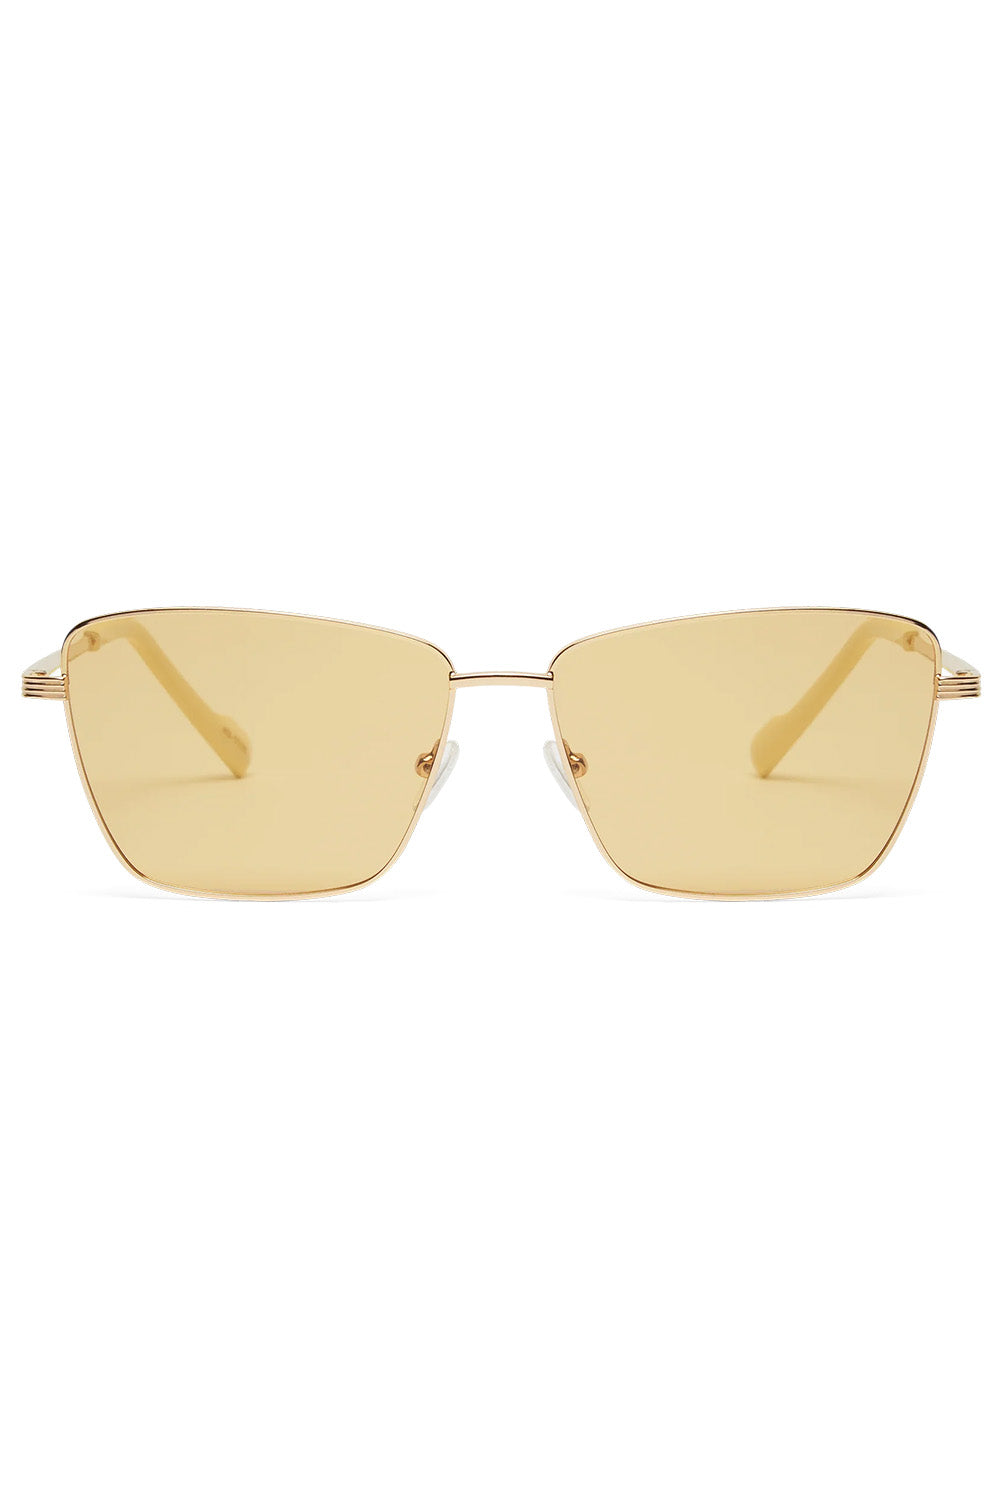 Banbe - The Natalia - Light Gold/Light Gold - Front